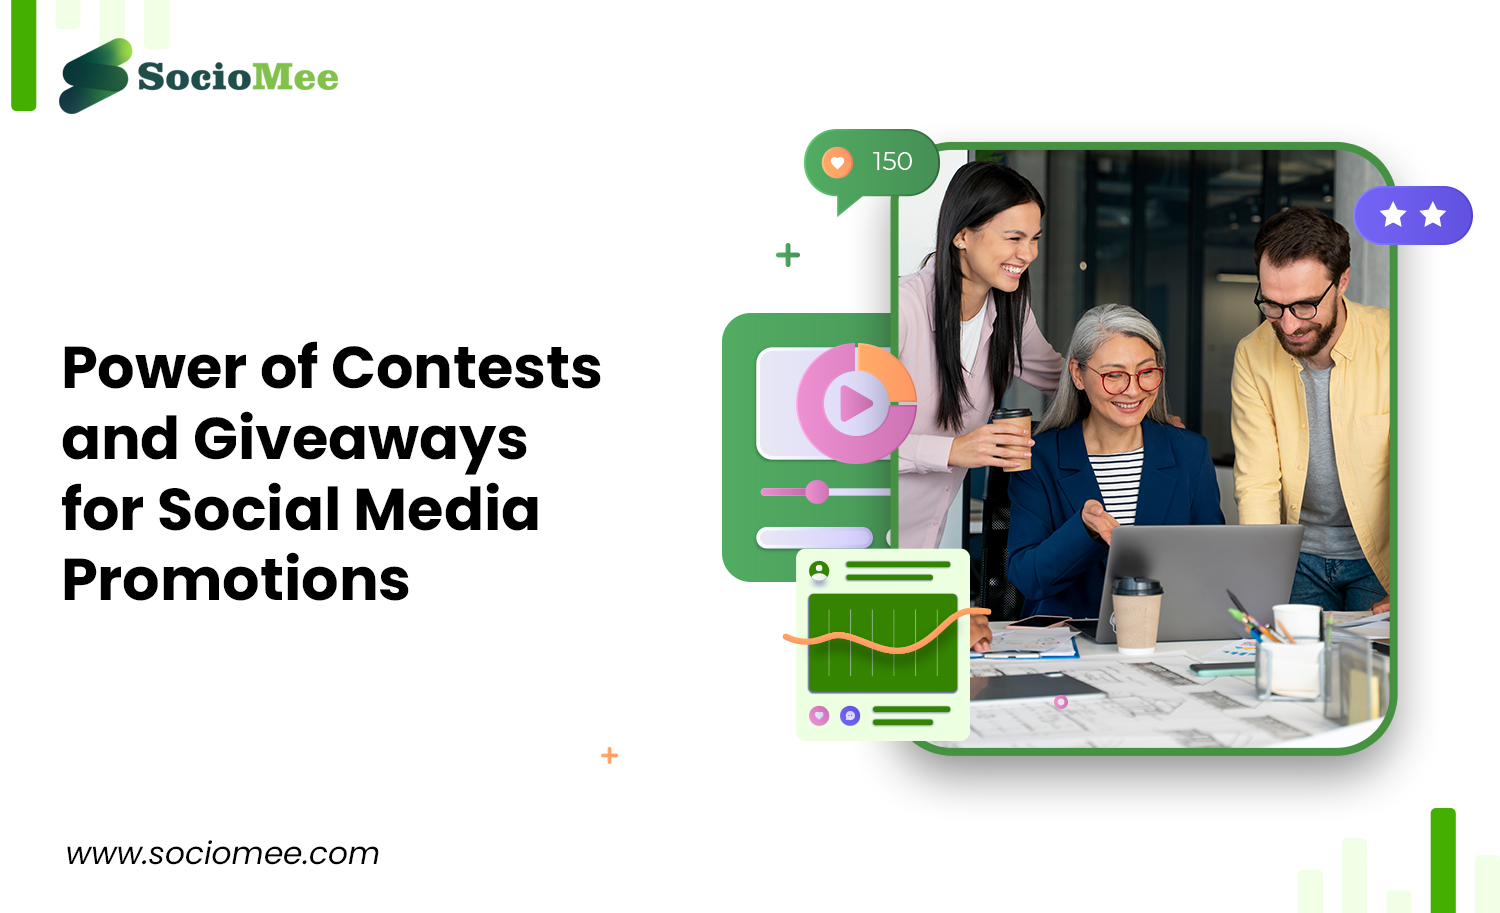 Using the Power of Contests and Giveaways for Social Media Promotions